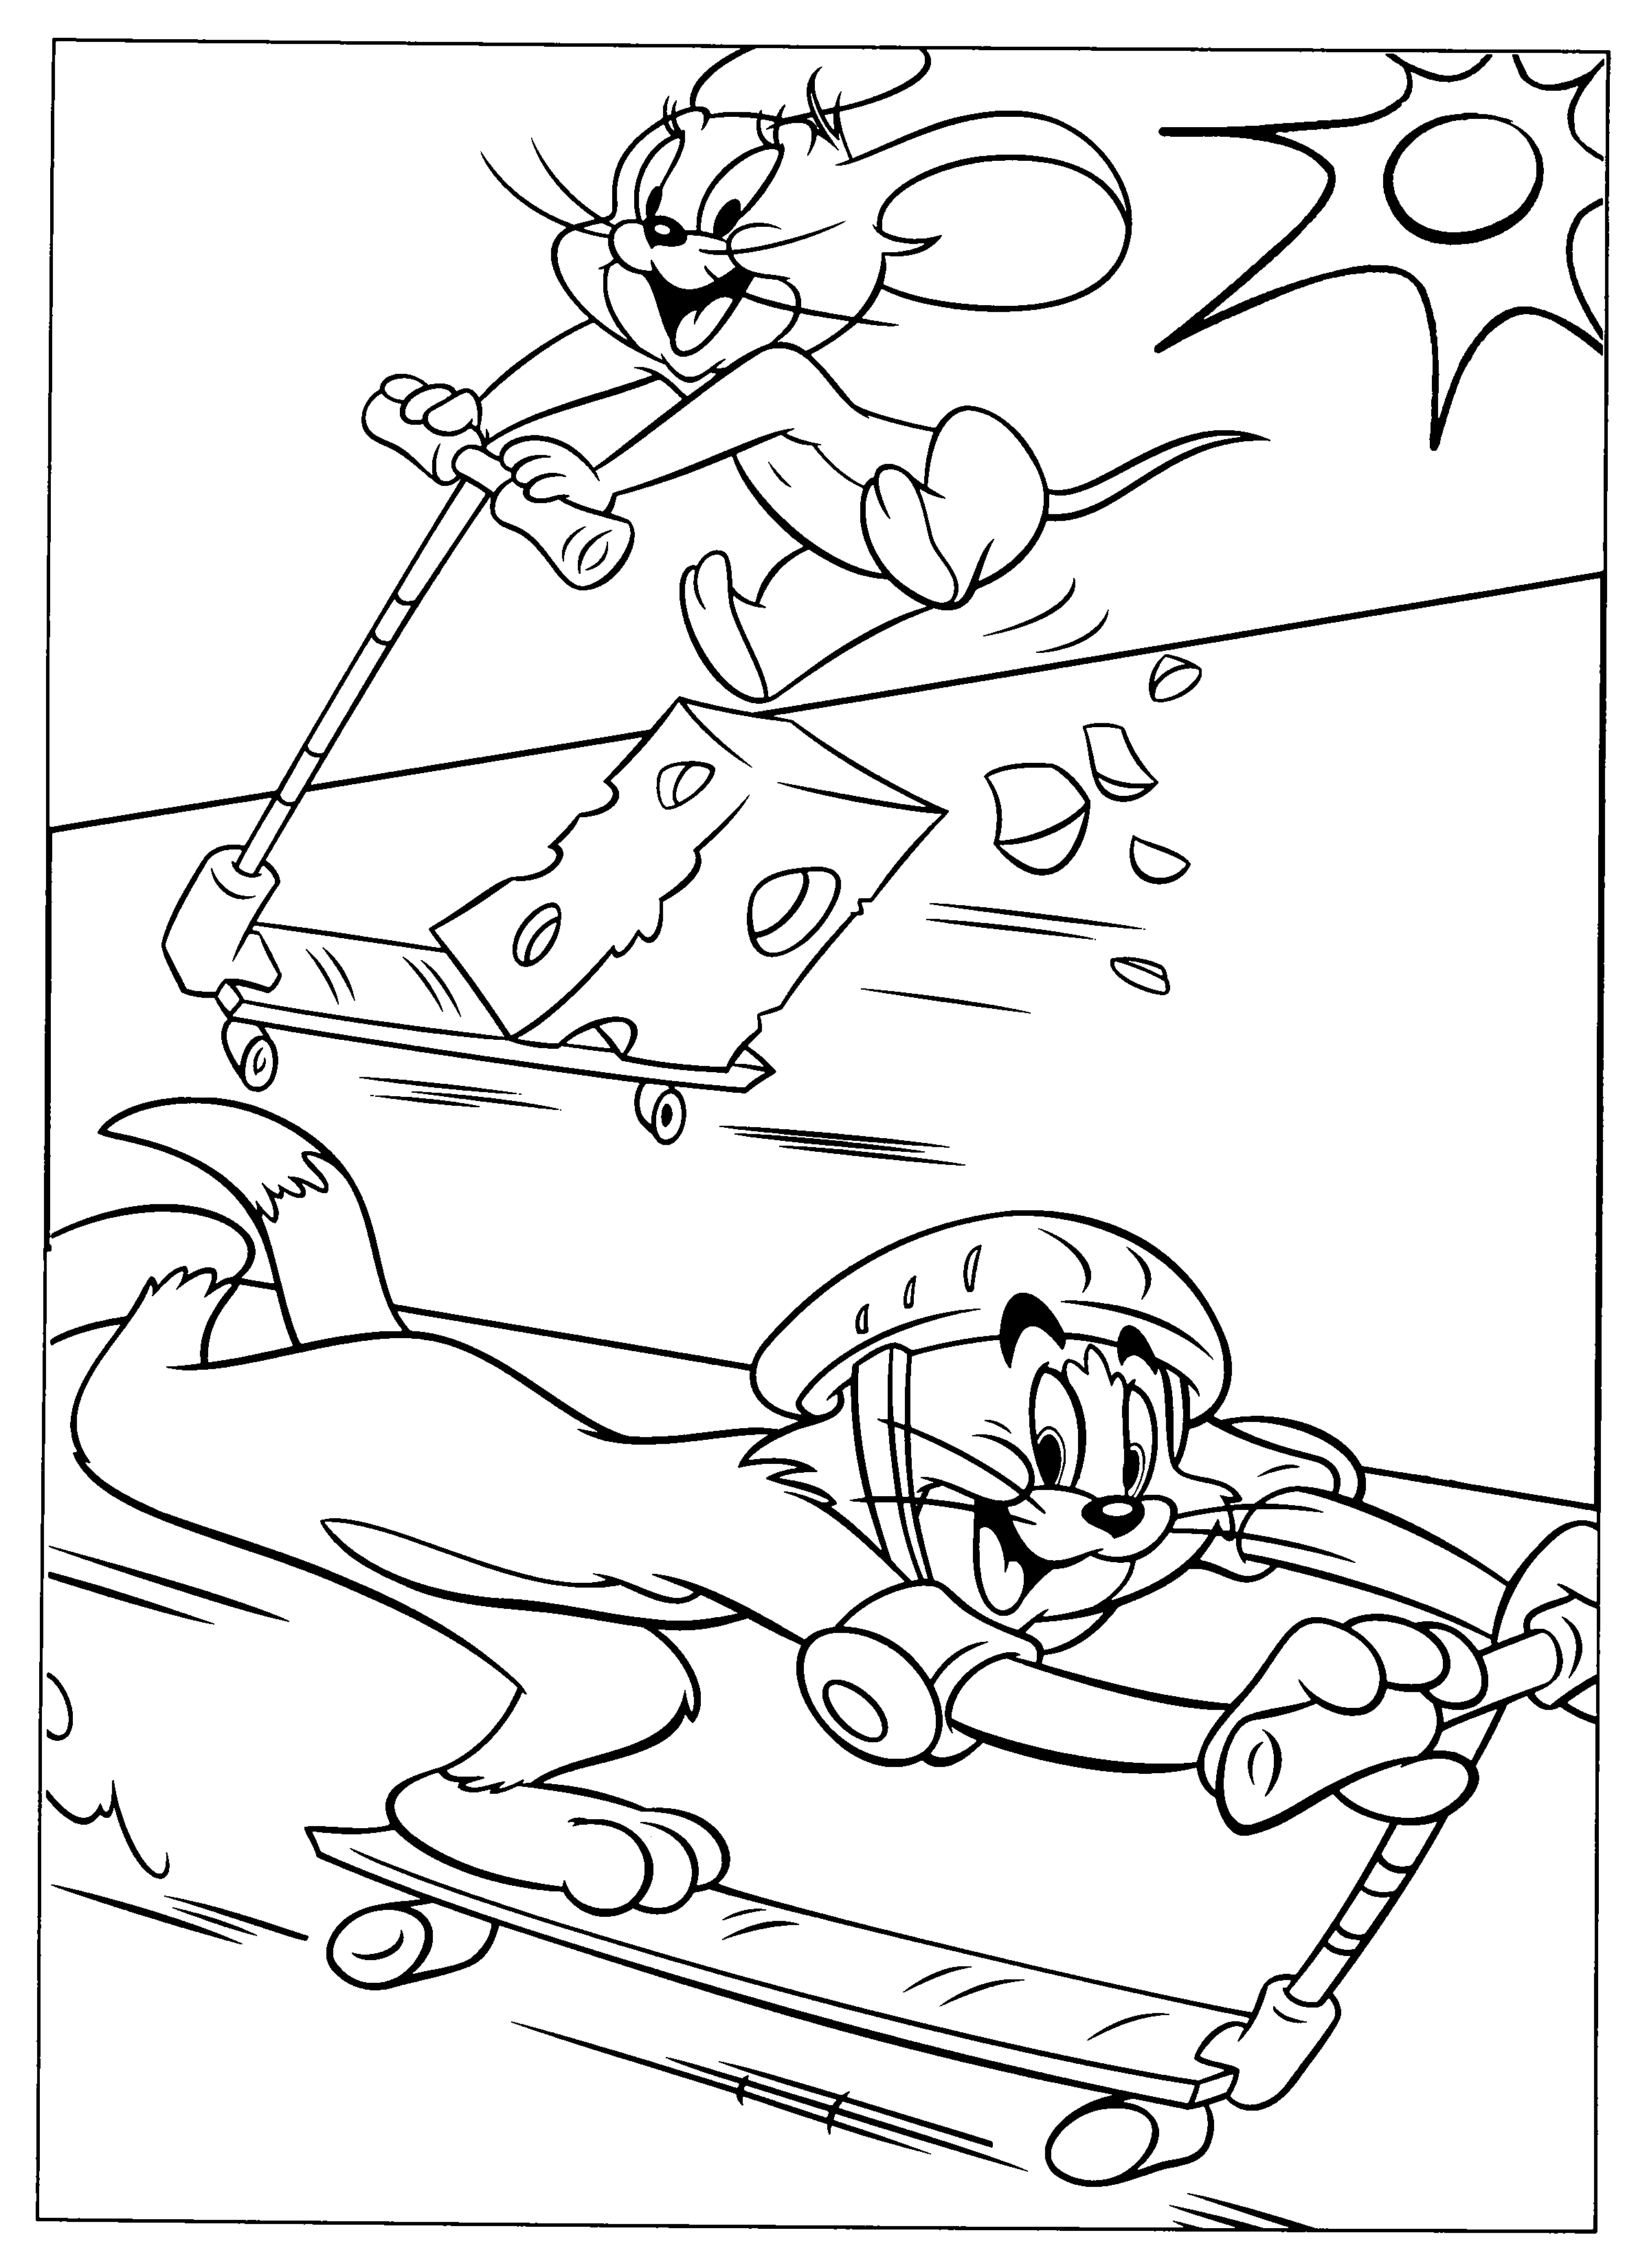 tom and jerry coloring pages online tom and jerry coloring pages coloringpages1001com jerry online tom pages coloring and 